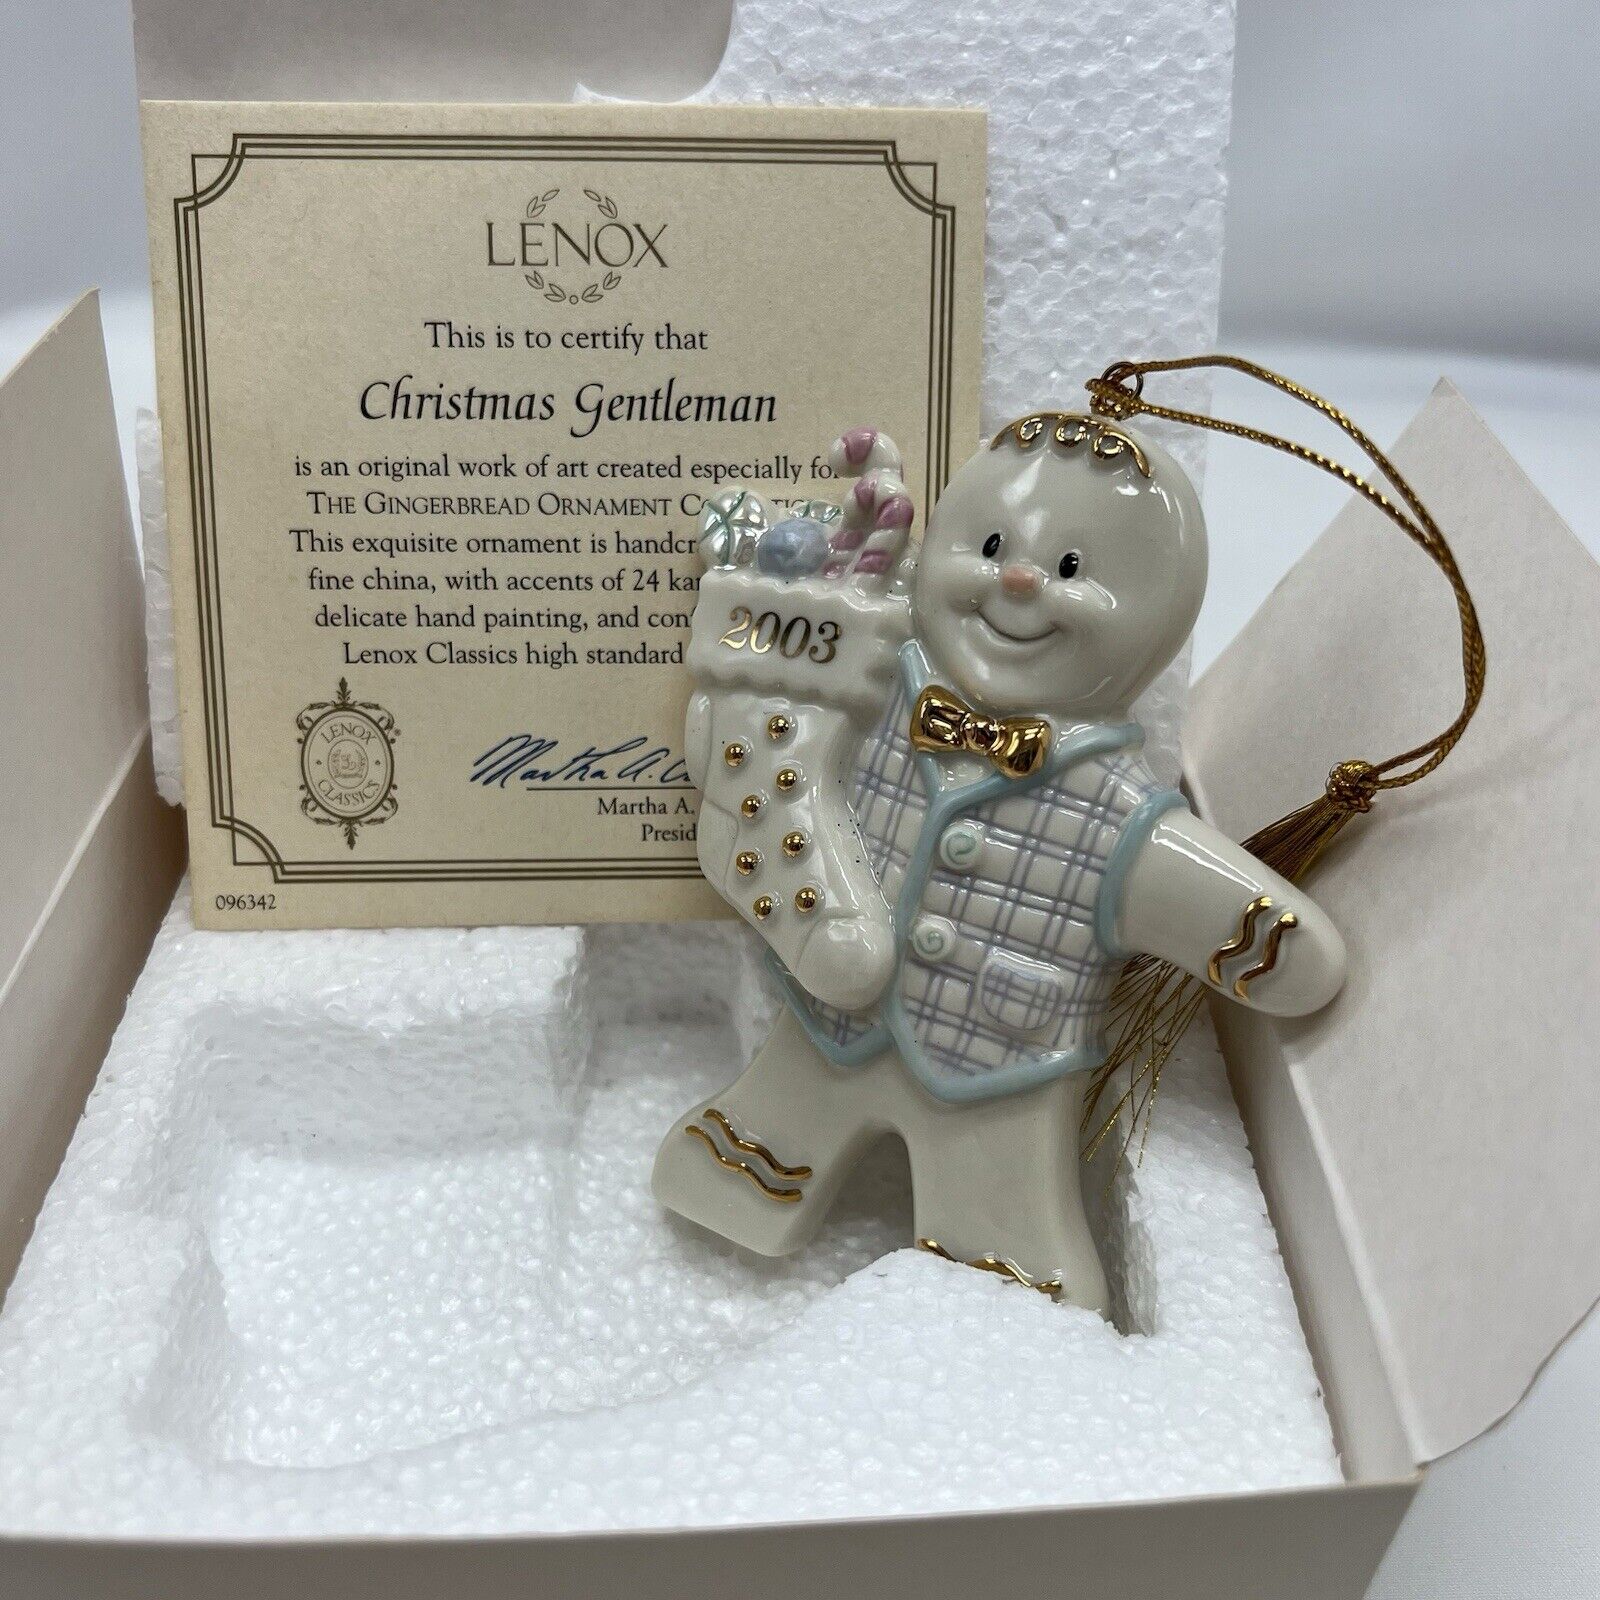 Lenox 2003 Christmas Gentleman Gingerbread Ornament Collection In Box